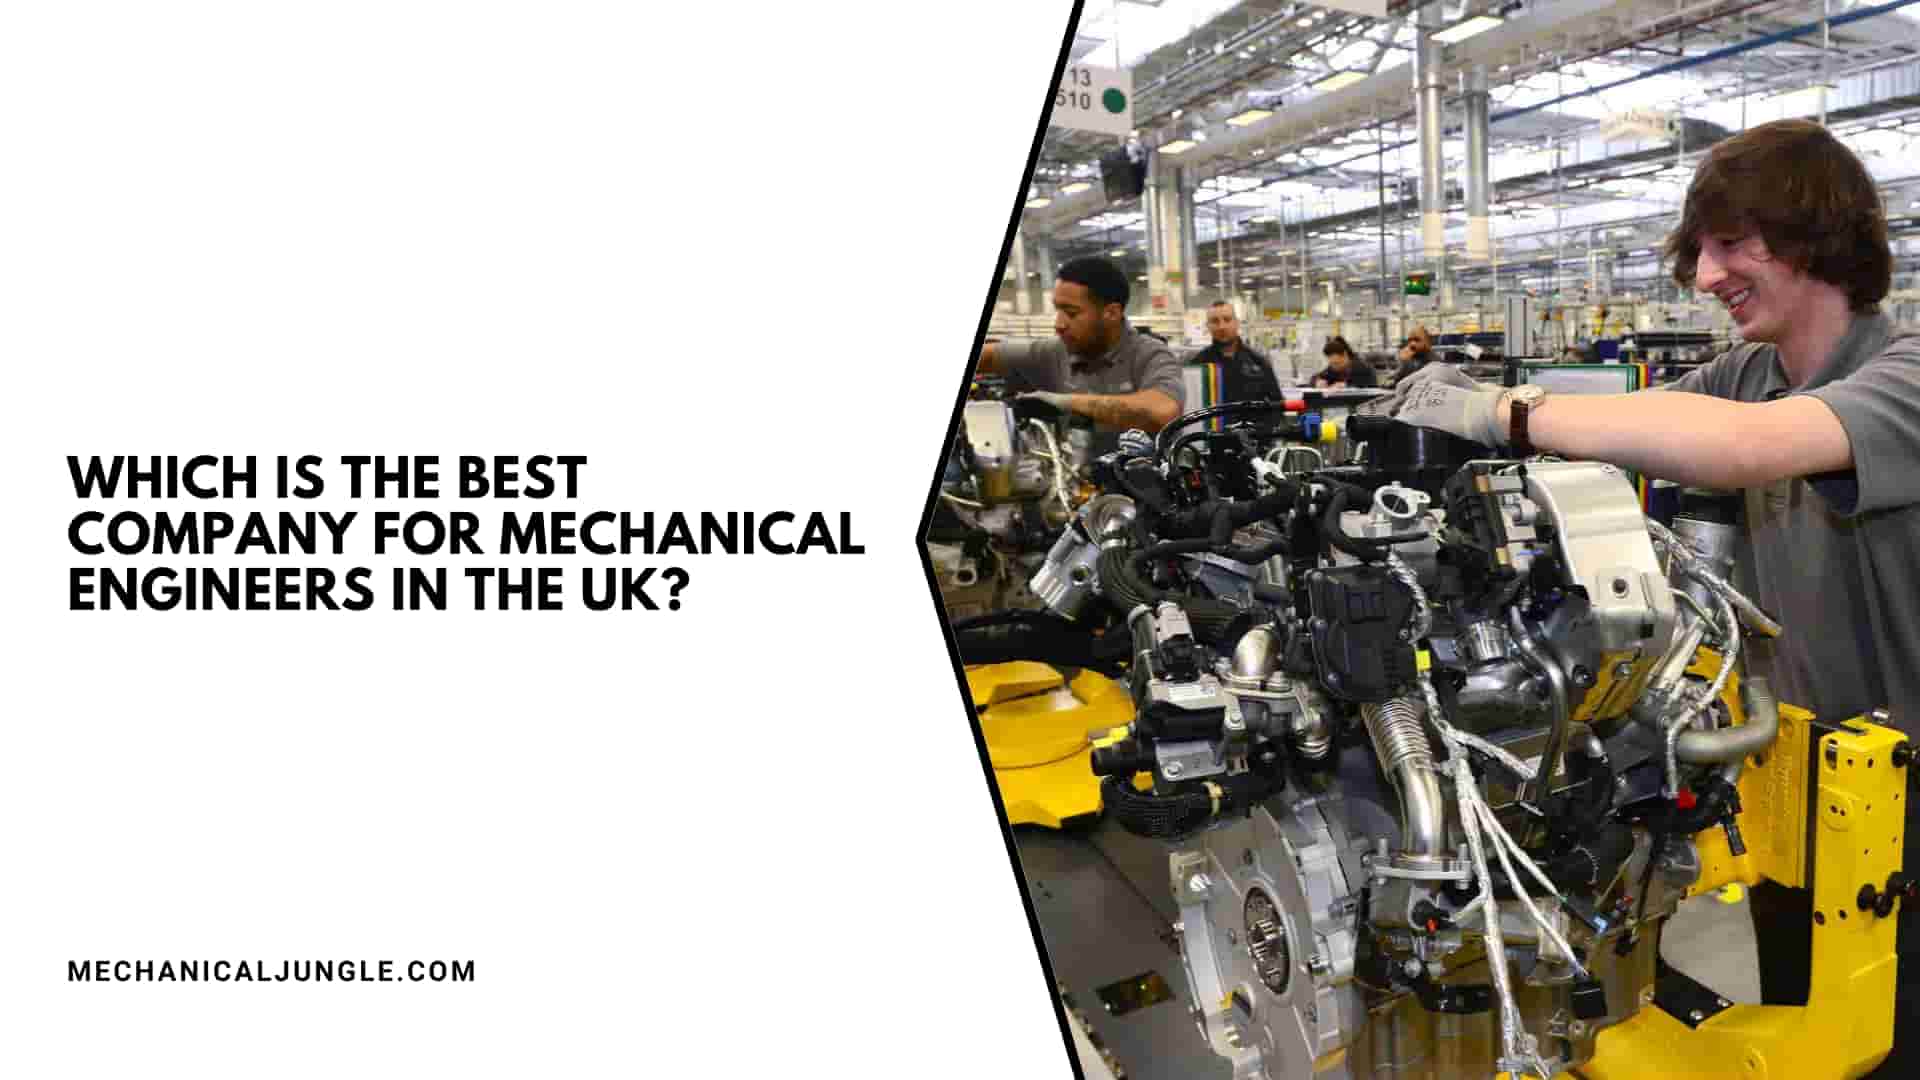 Which Is the Best Company for Mechanical Engineers in the UK?